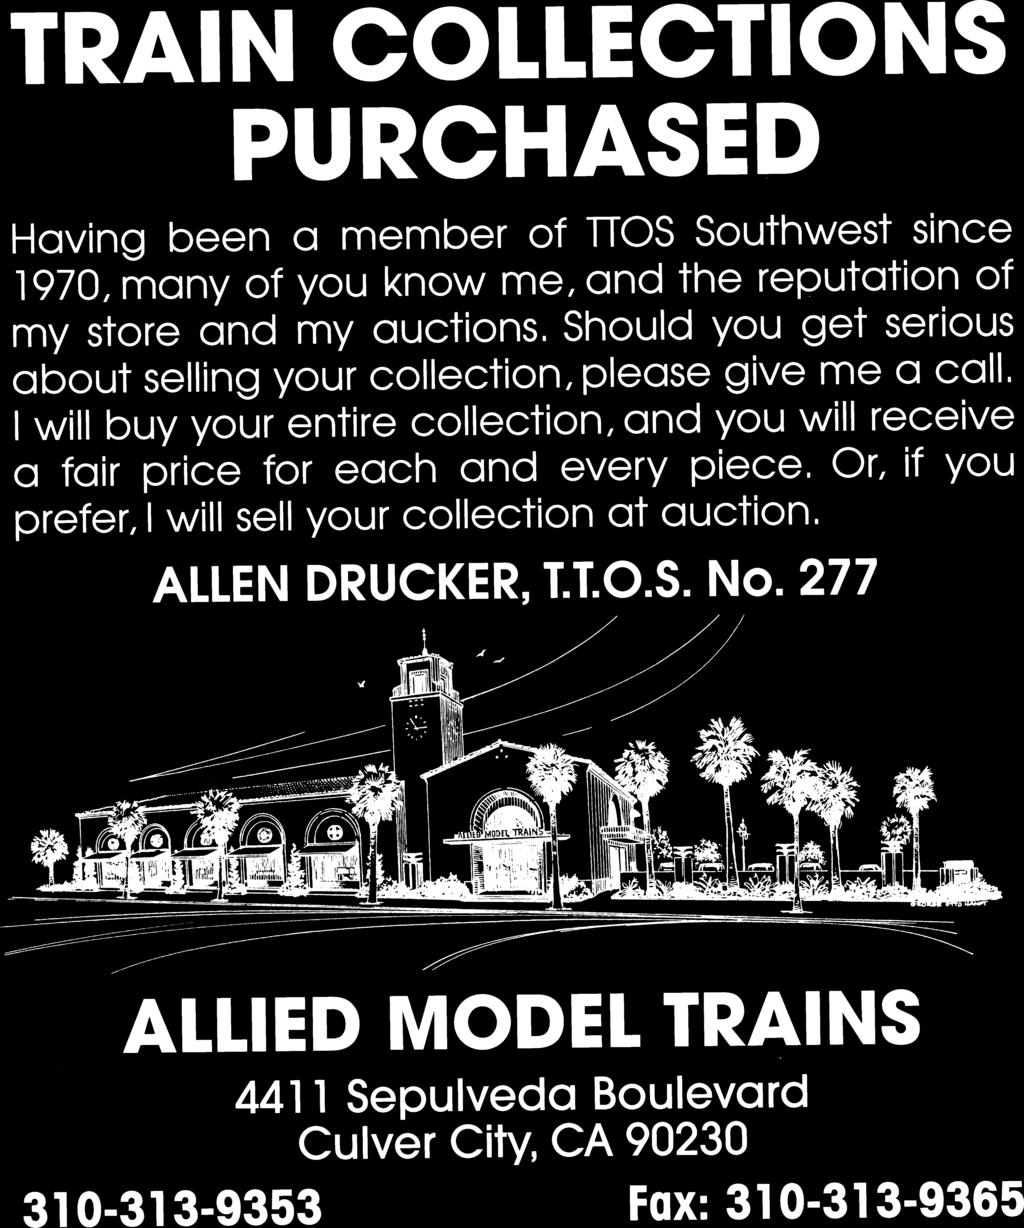 Like I said before, when the club disposes your trains, they re going back into our hobby and to the people who love them.